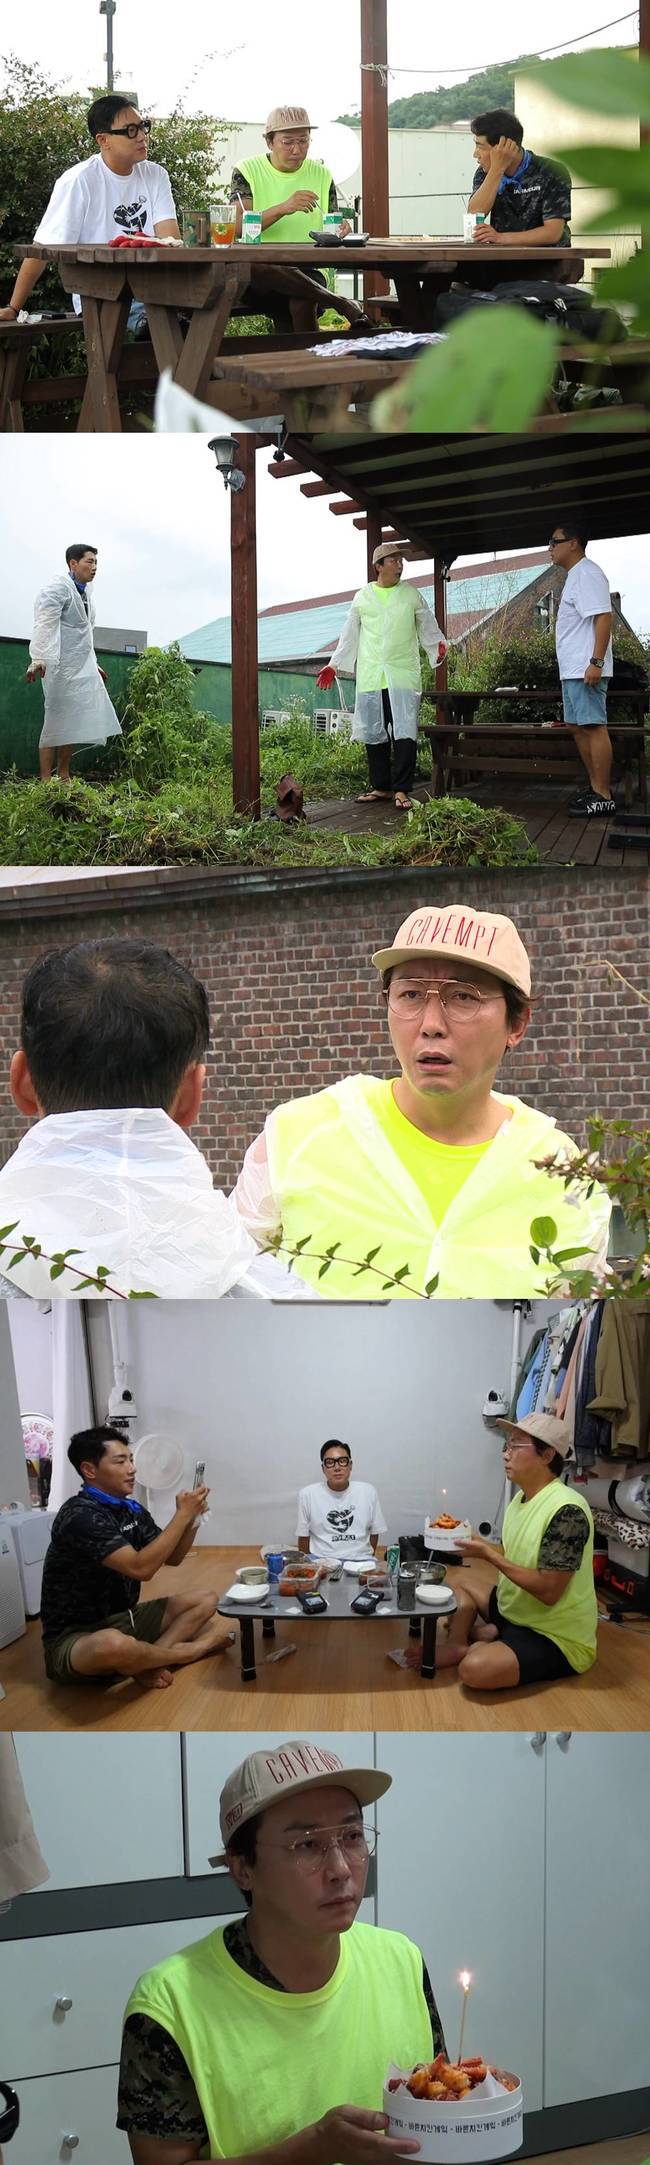 My Little Old Boy Sons is called to an emergency meeting at the Tak Jae-hun birthday party.On SBS My Little Old Boy, which will be broadcast on August 29, a small birthday party of the ageless Tak Jae-hun will be unveiled.Lee Sang-min, as the head of My Little Old Boy, ordered the Sons chat room to call an emergency call, saying, I want everyone to attend because it is my brothers birthday today.Sangmin, who did not know it was Tak Jae-huns birthday and called it a worker in the rooftop room of Park Gun, held a birthday party in a hurry.In fact, Tak Jae-hun thought he was calling to give his surprise birthday party, so he pulled out the grass with his bare hands in the bad weather and laughed as he looked forward to saying, So who is coming?However, when Jae-hoon found out that Sang-min and Park Gun had forgotten their birthday, he exploded his sadness, saying, It is wrong to be born!Surprised by this, Sangmin and Park Gun were in a hurry to call Sons with a small birthday prize as an instant food in the room.